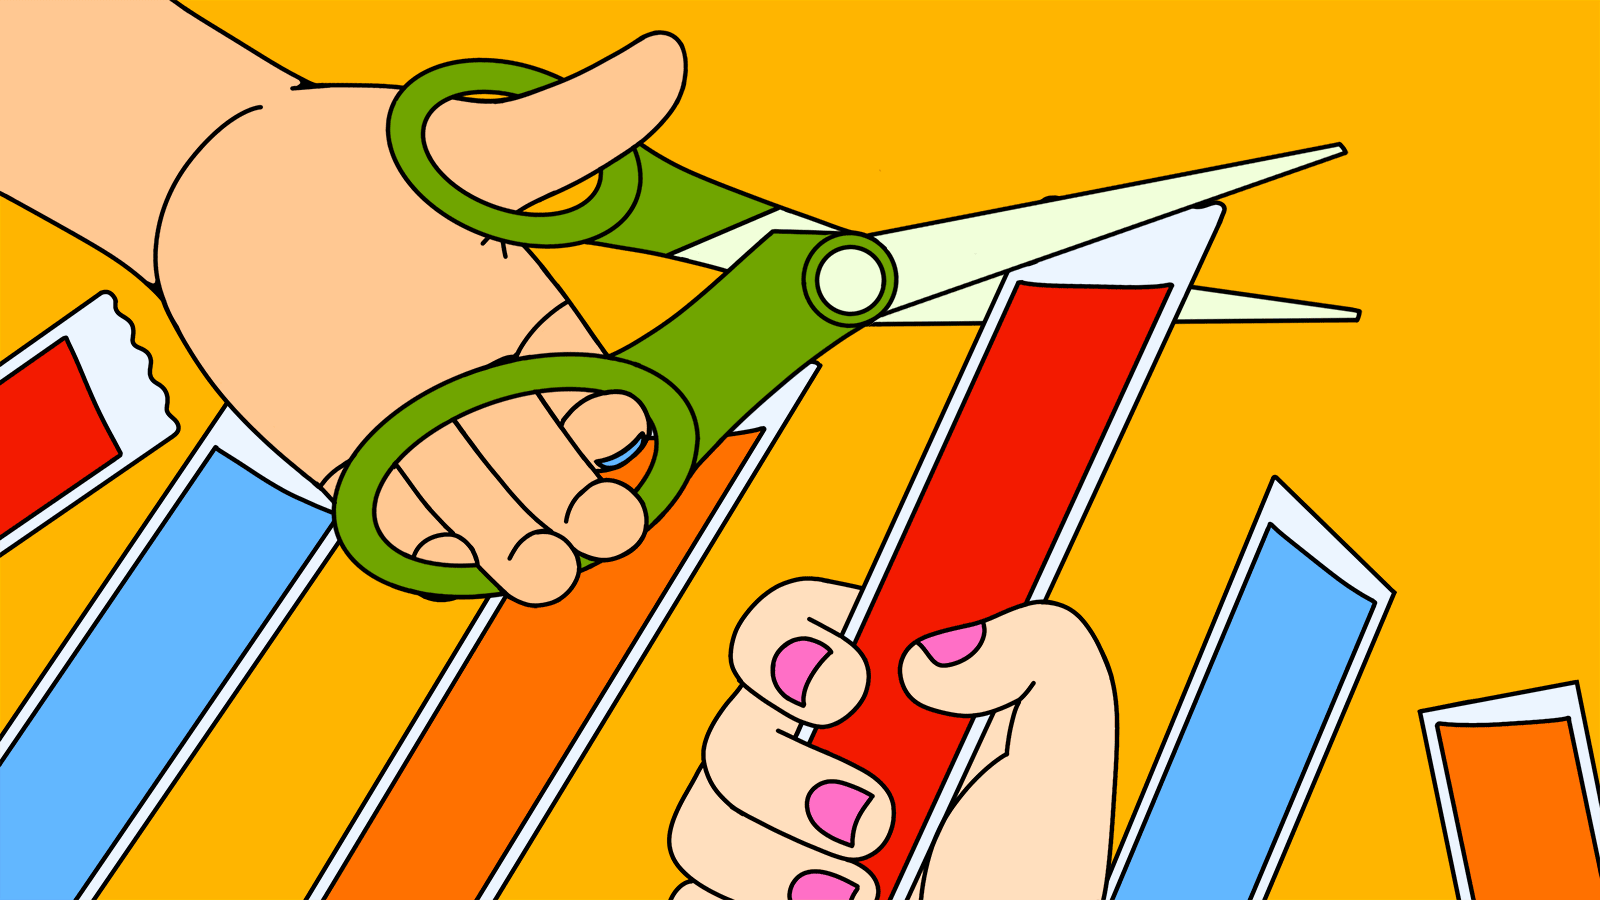 A hand holding a pair of scissors cuts the tops off popsicles in tubes. Illustration/GIF.